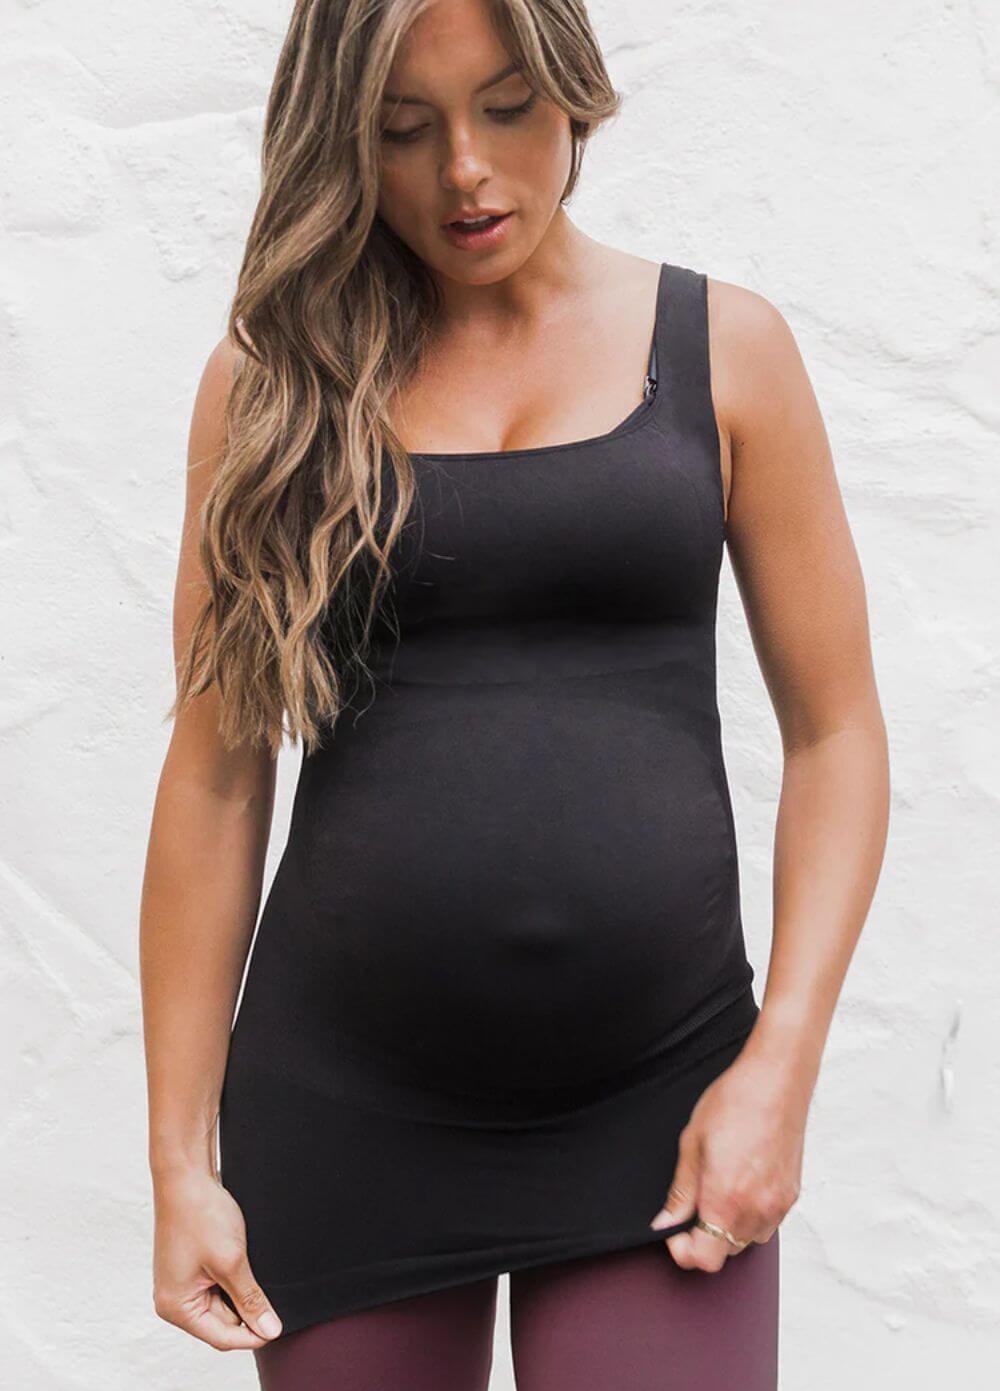 BodyStyler Maternity Belly Support Tank Top in Black by Blanqi